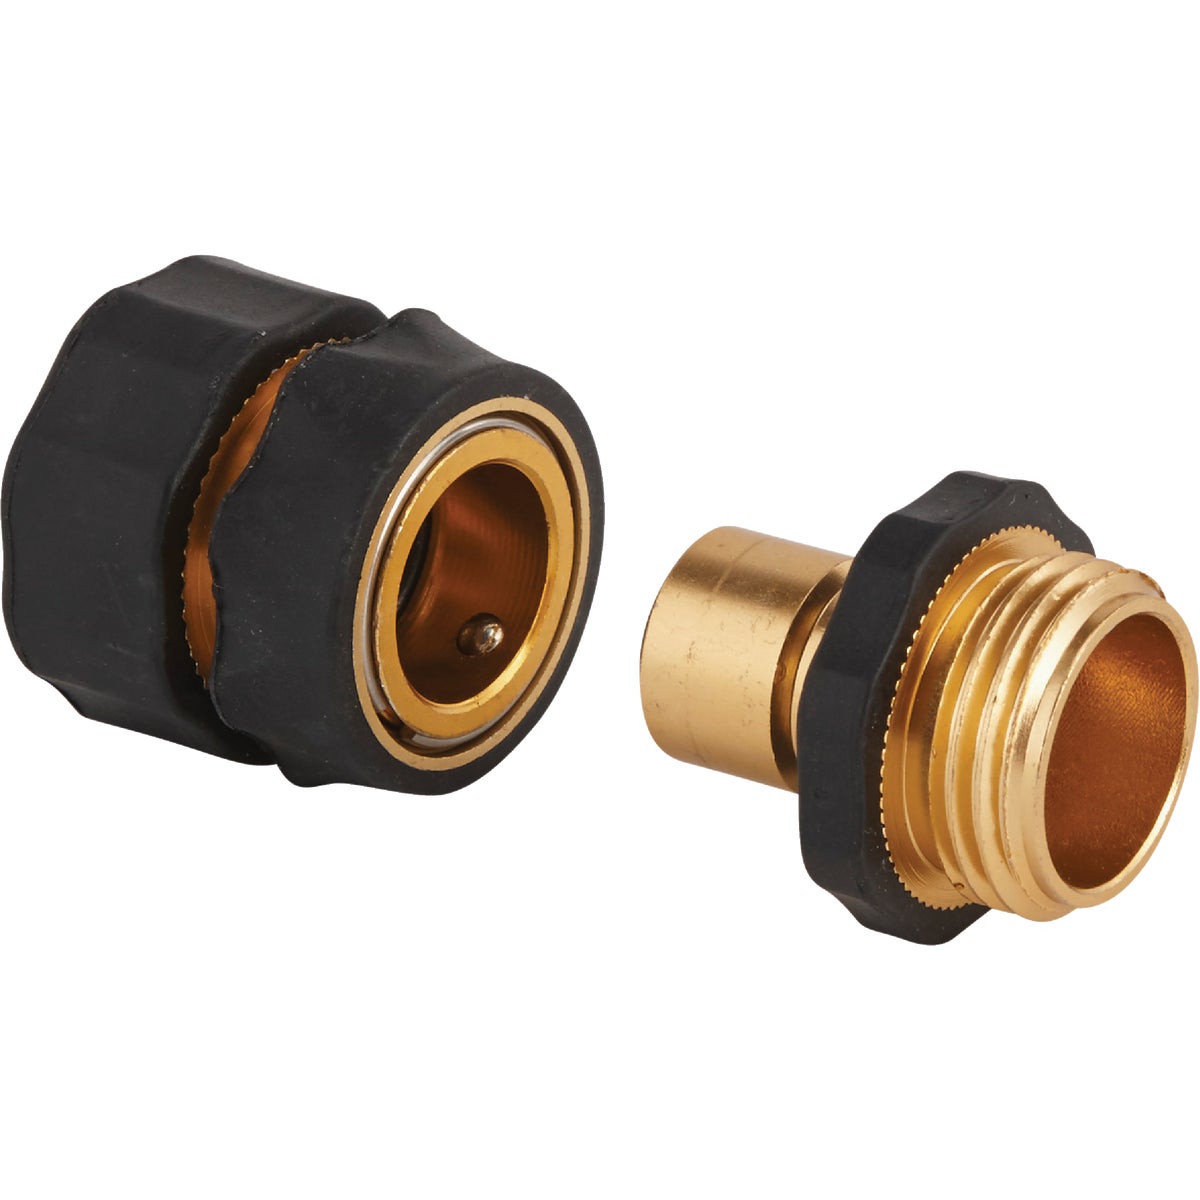 Item 733255, Quick connect adapter set for quickly switching and connecting hoses and 